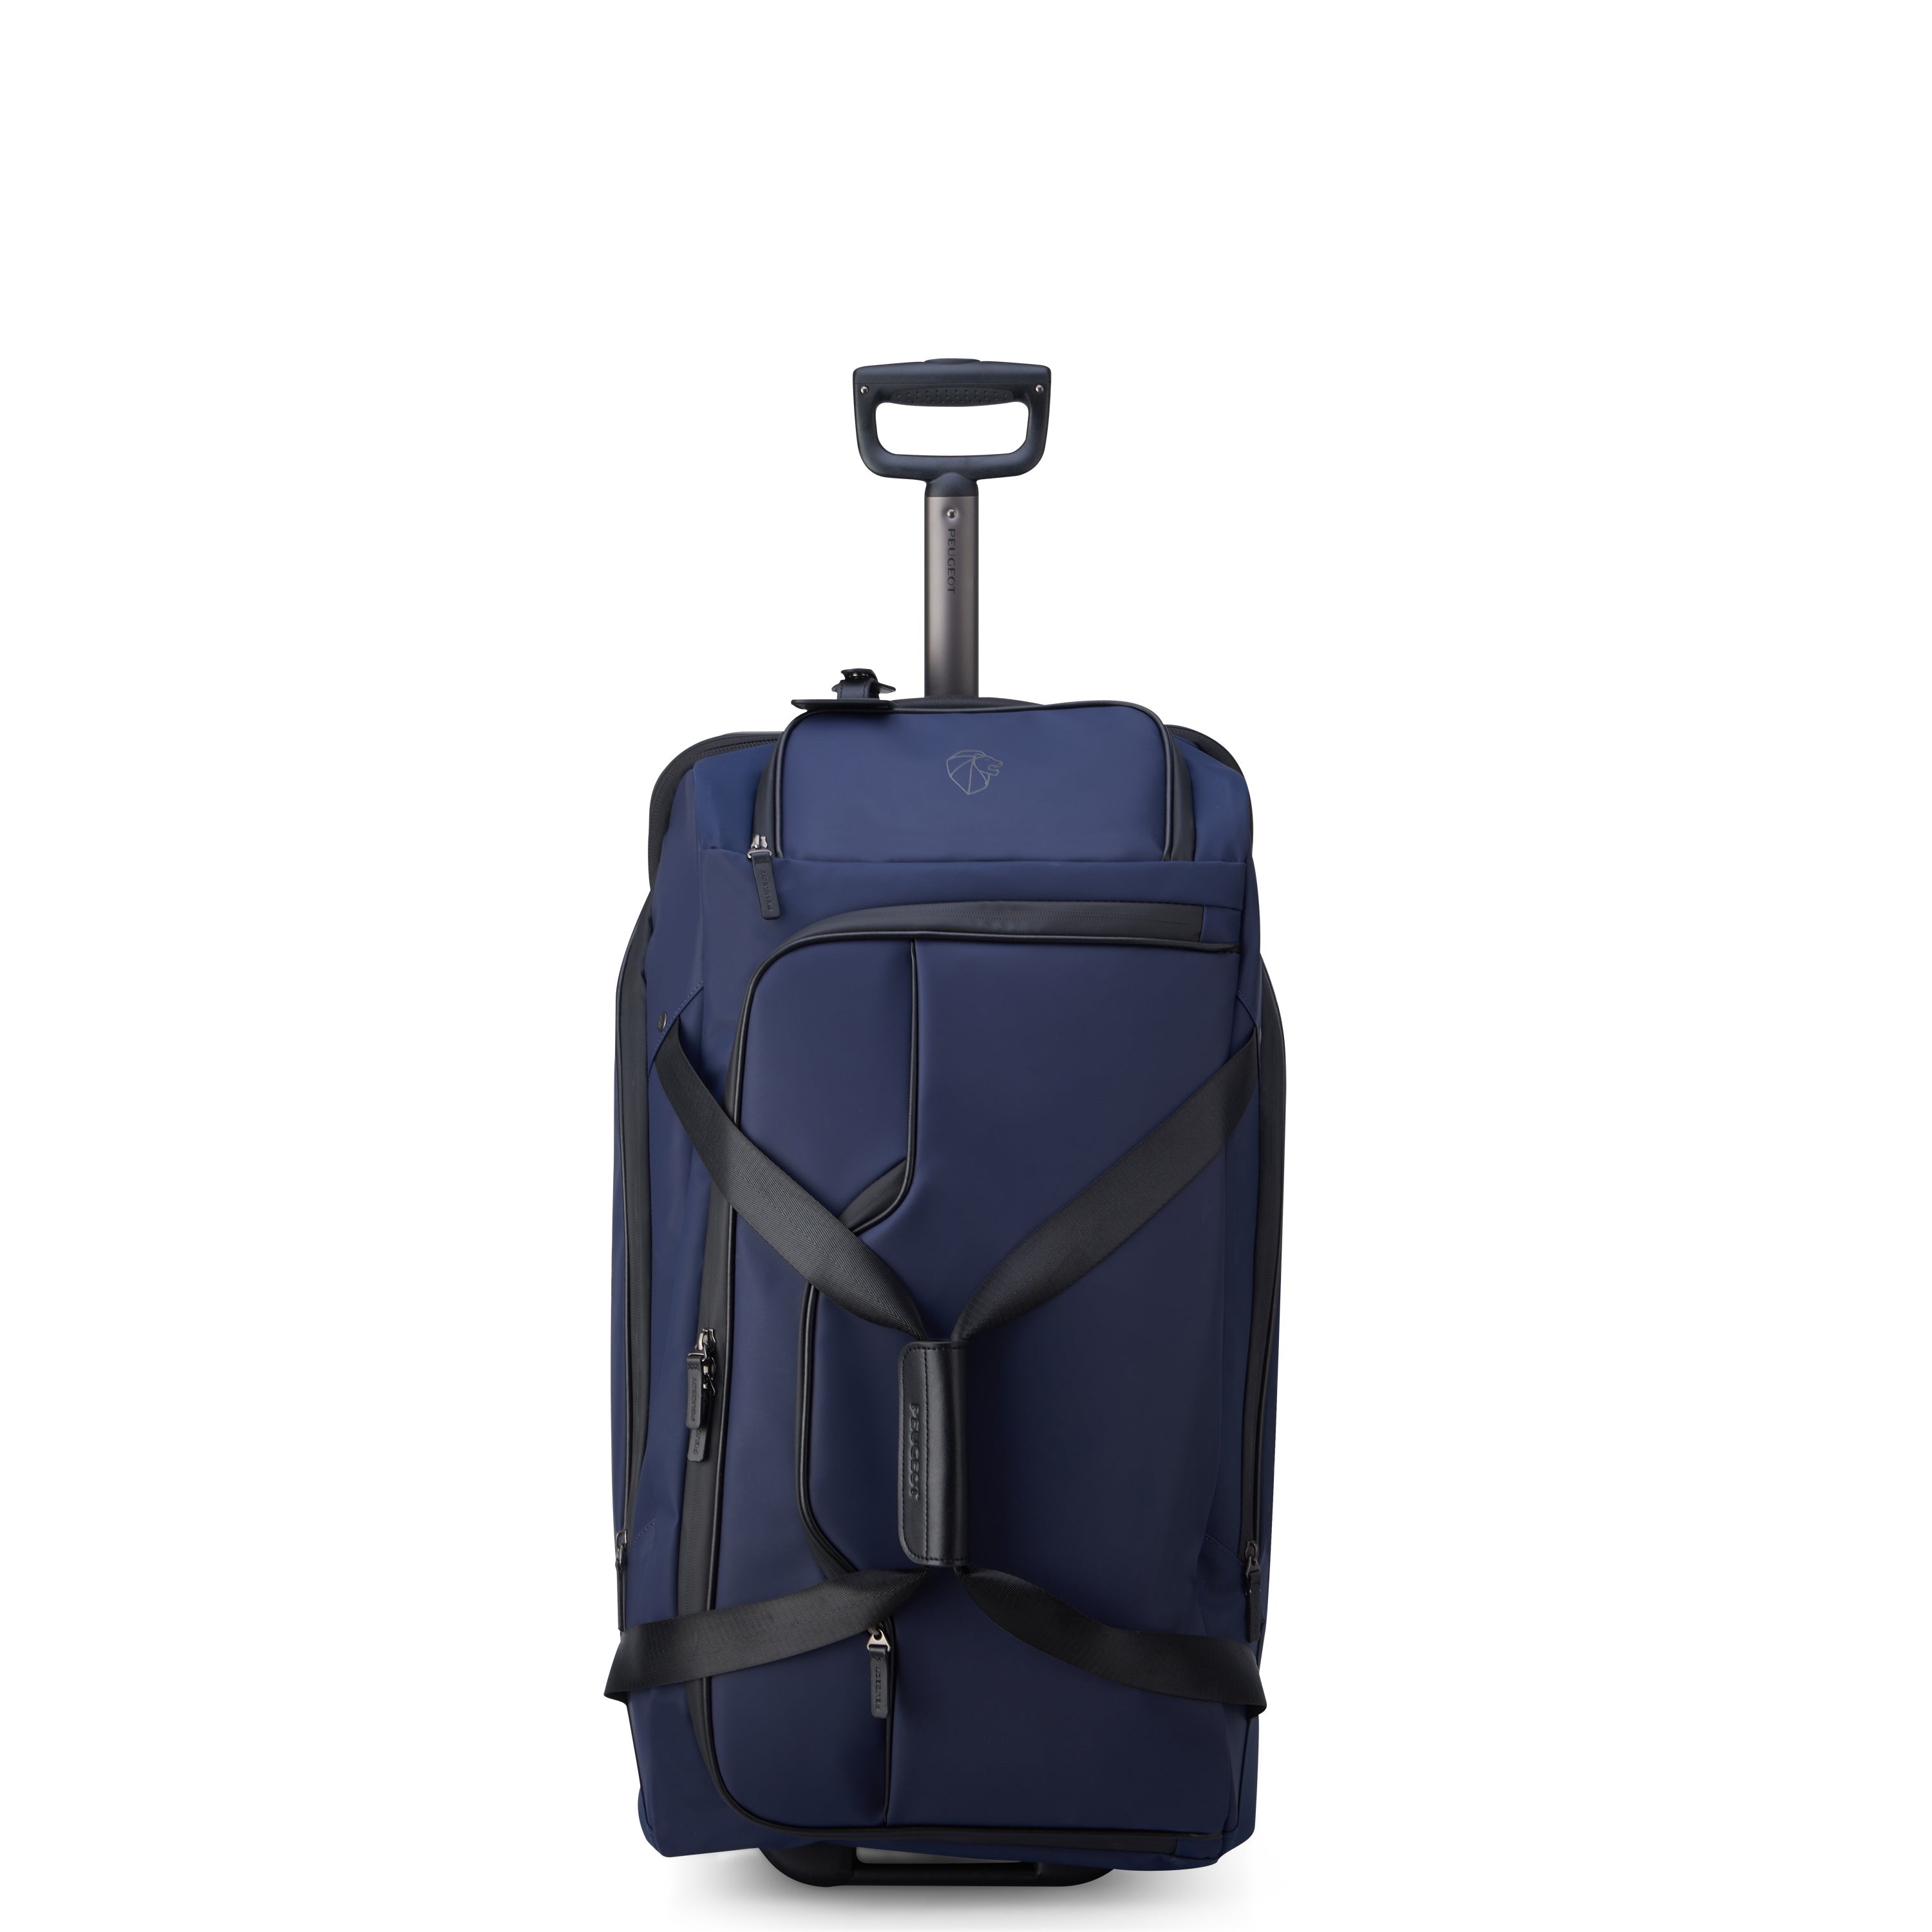 Peugeot Voyages Travel 70cm Softcase 2 Wheel Hybrid Check-In Luggage Duffle Trolley